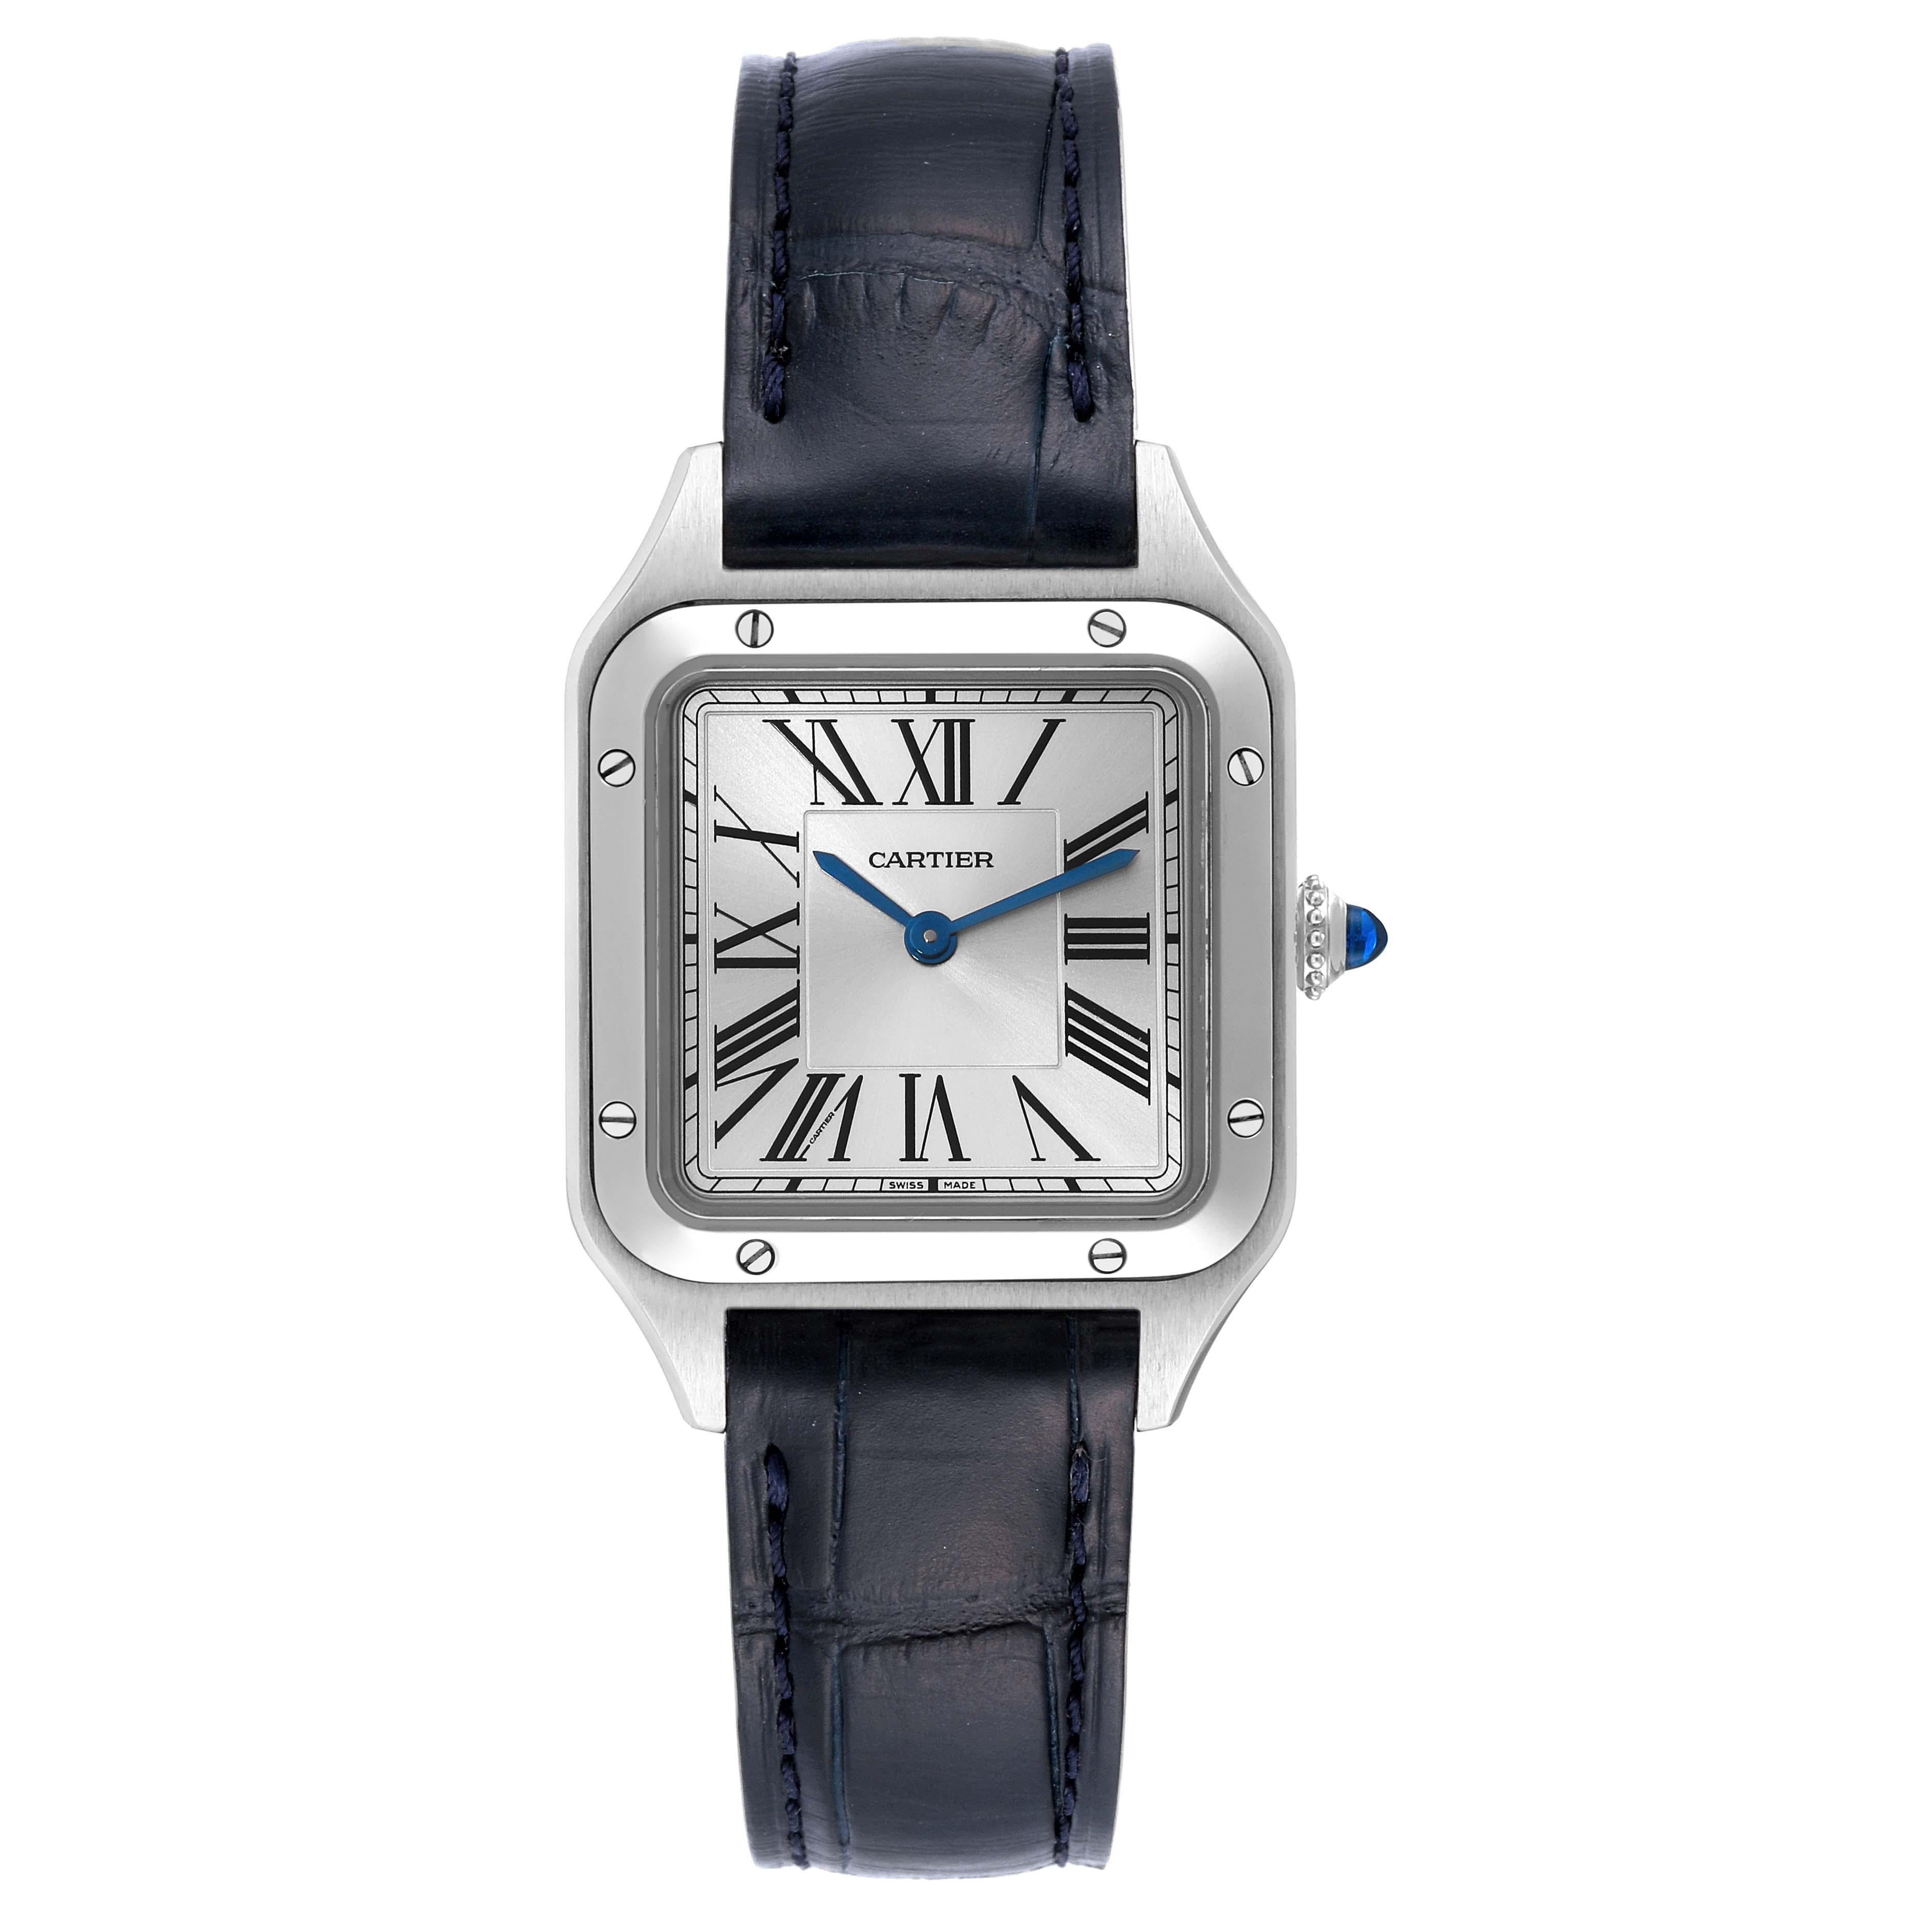 Cartier Santos Dumont Small Steel Ladies Watch WSSA0023 Box Card. Quartz movement. Stainless steel case 38 mm x 27.5 mm. Case thickness 7.3 mm. Circular grained crown set with blue spinel cabochon. Stainless steel bezel punctuated with 8 signature